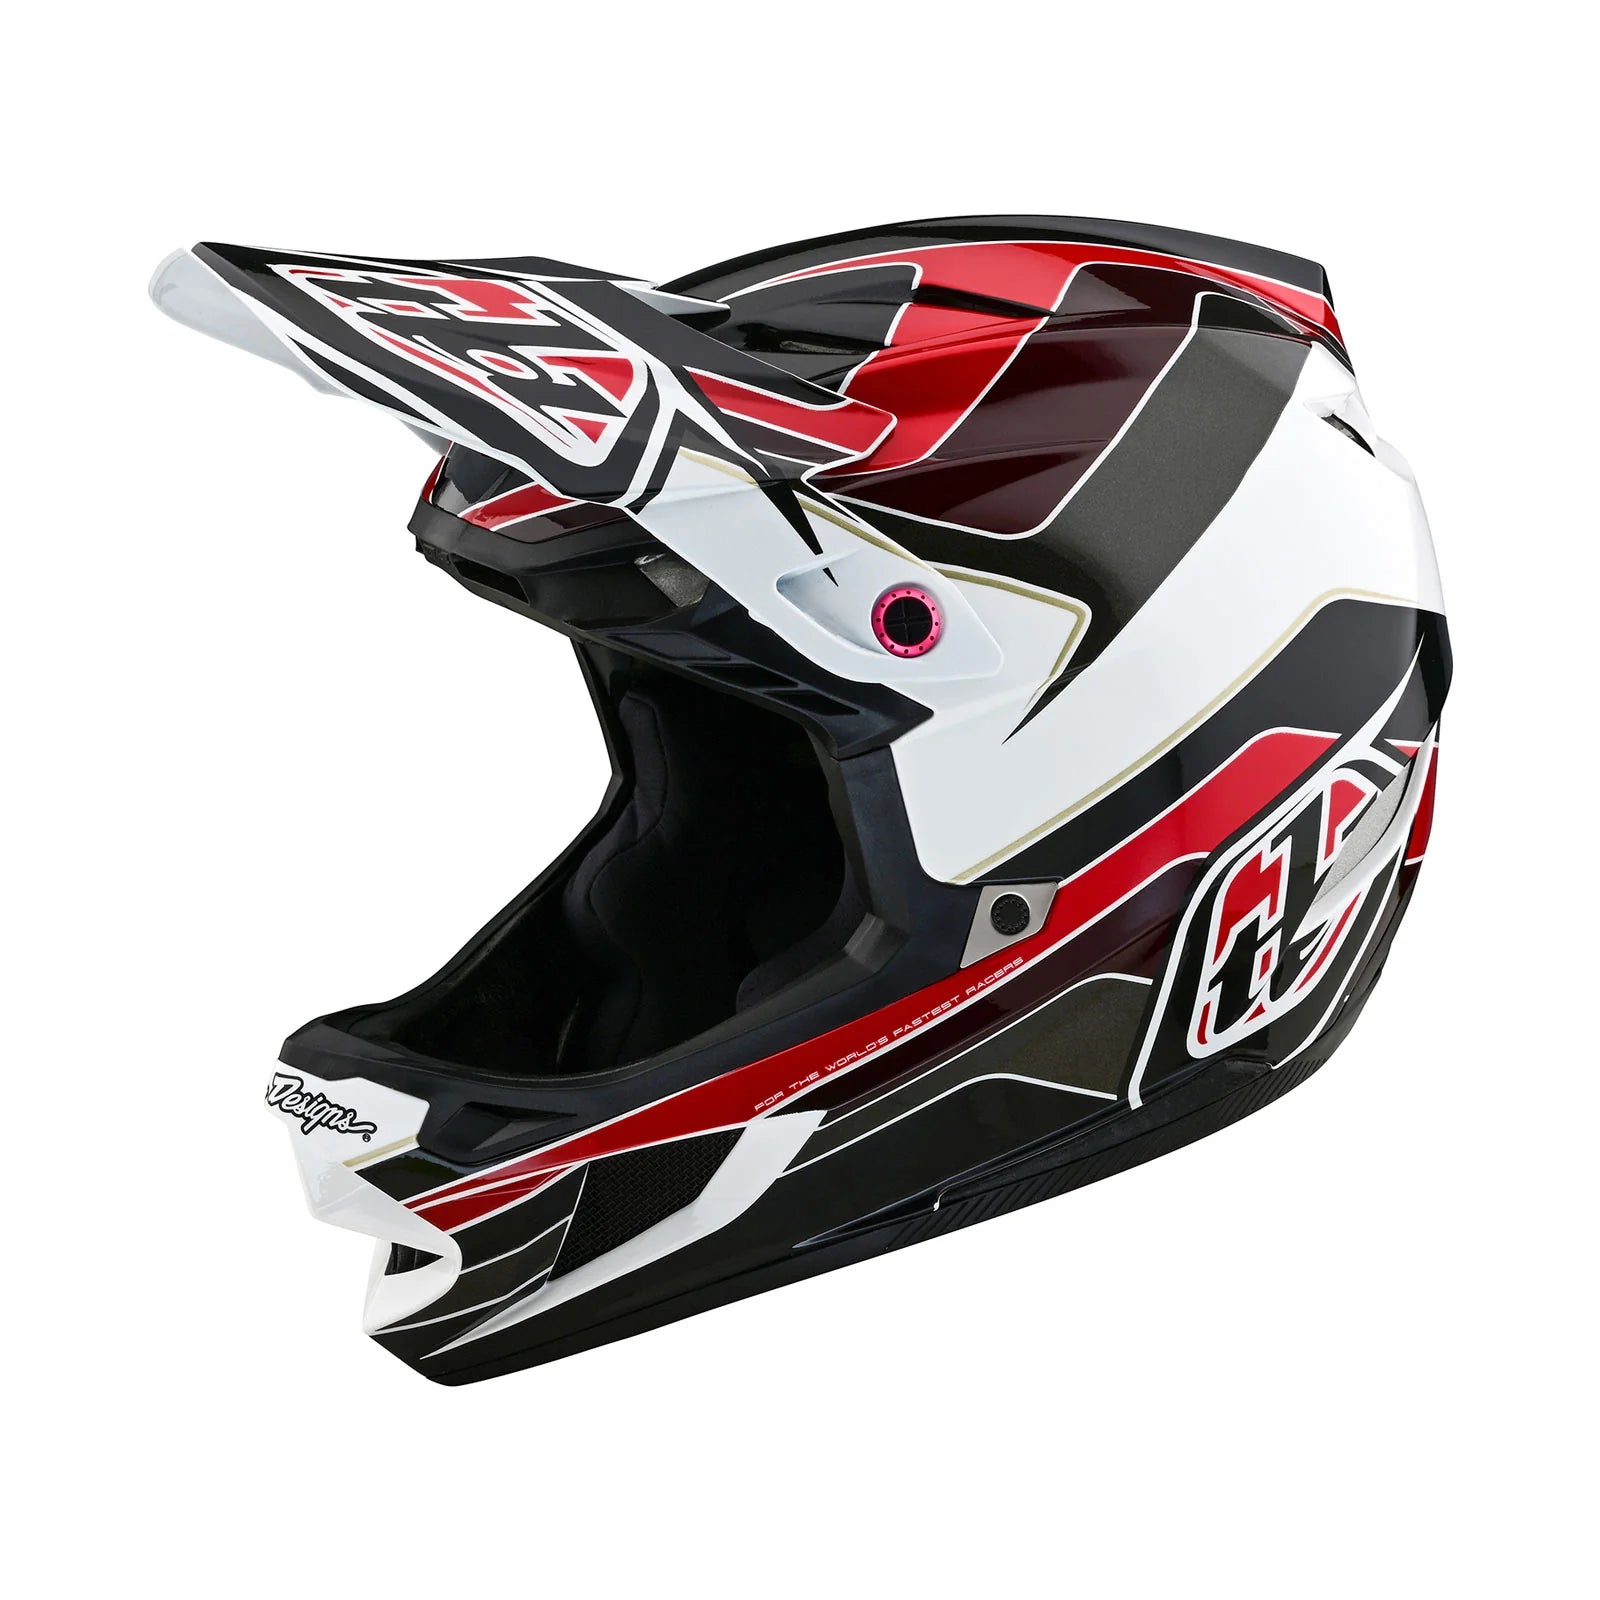 A TLD D4 AS Polyacrylite Helmet W/MIPS Block Charcoal / Red with a black and red design prioritizing safety.